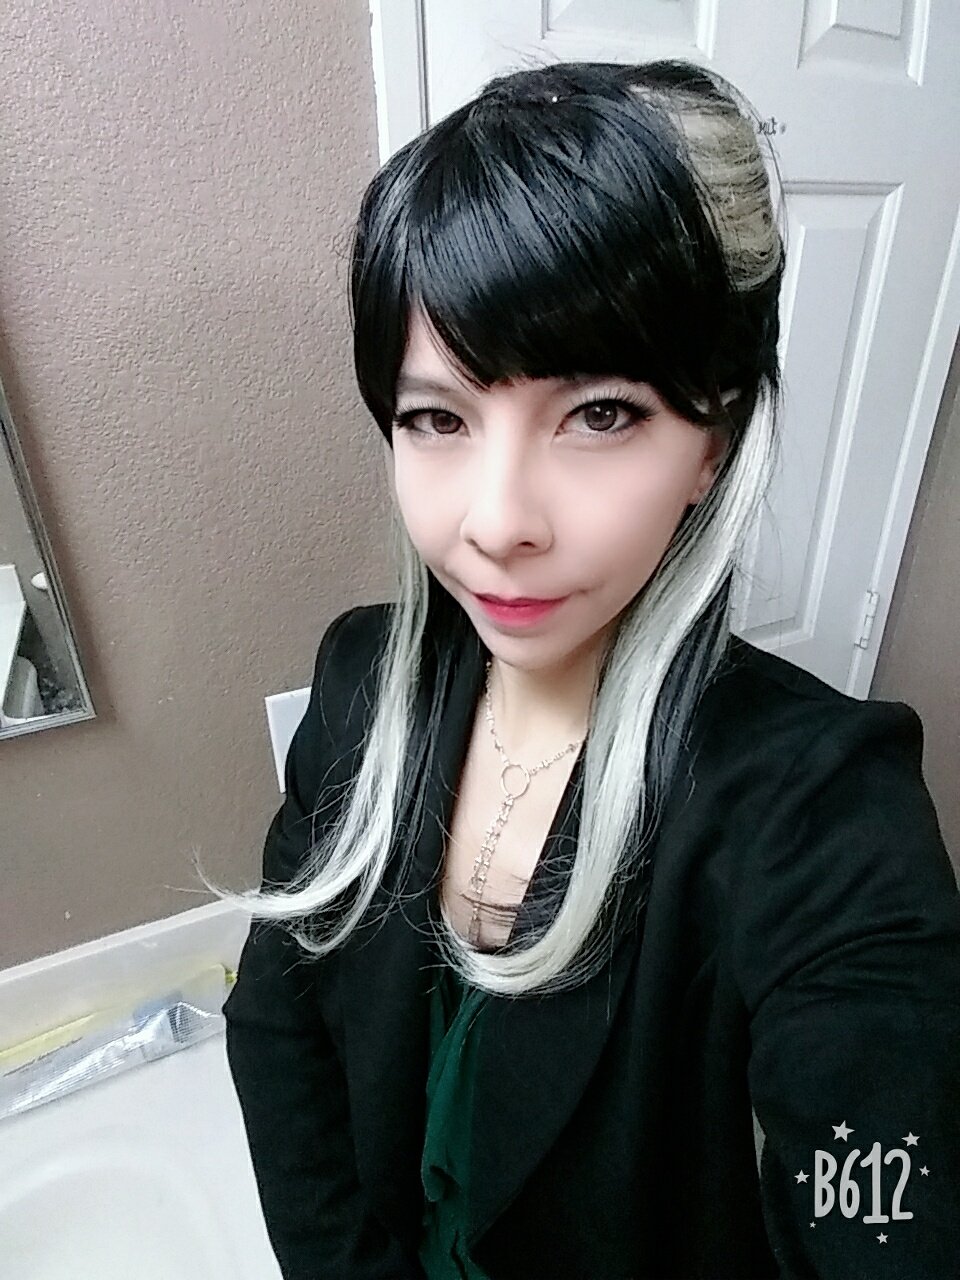 Kookiesinmymilk on Twitter: "Happy Hallows Eve everyone!!! I am spending it at but we get to dress up. I chose to be the lovely Narcissa Malfoy. Such a great Who